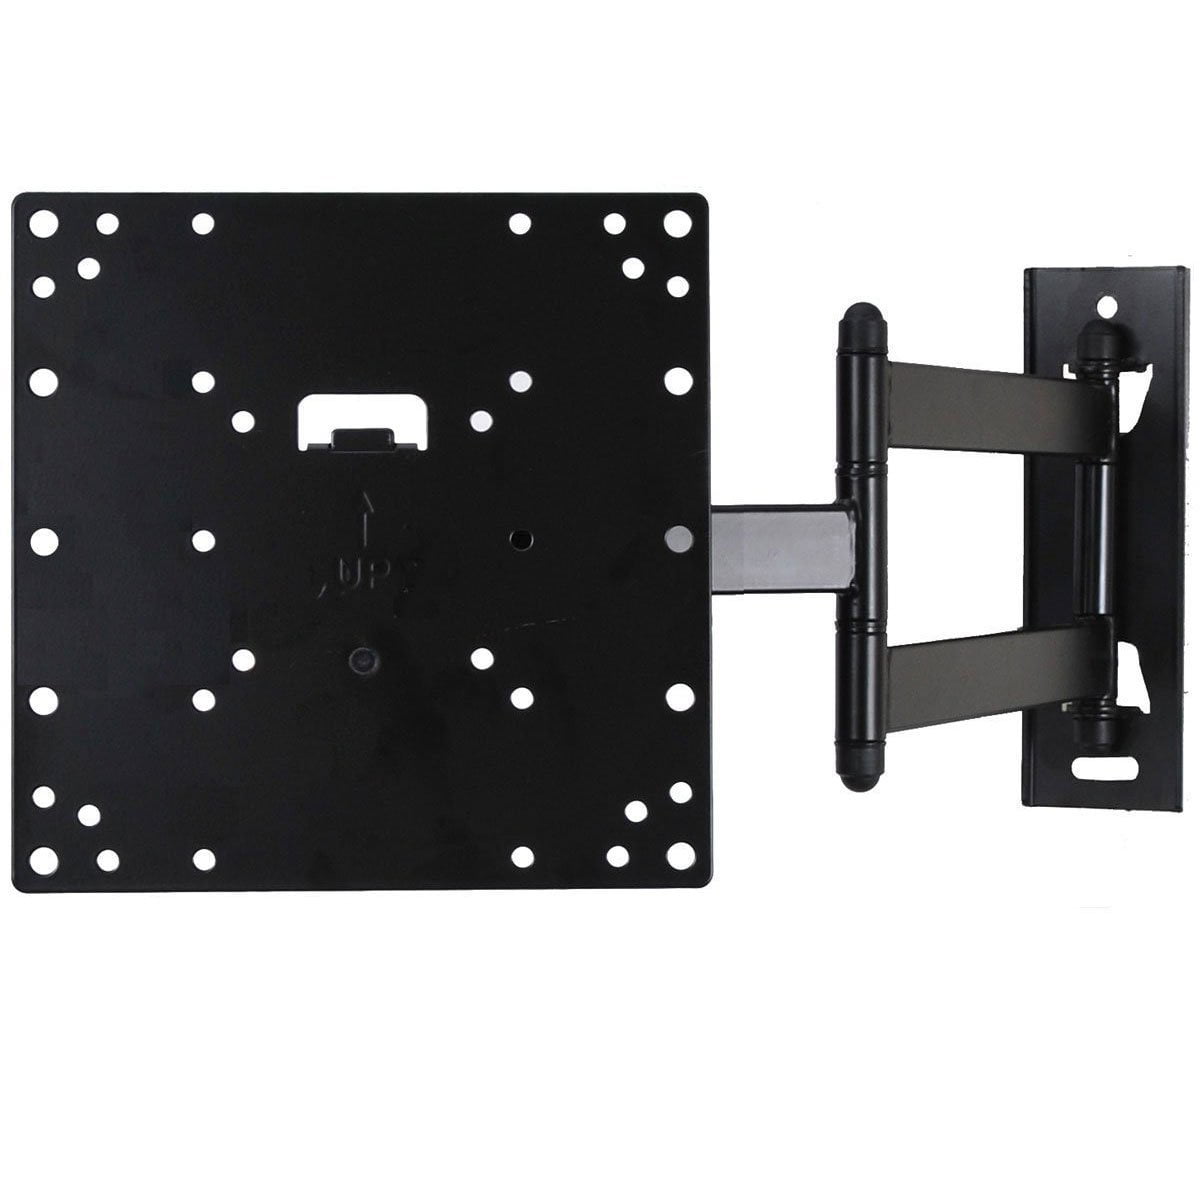 Details about   PEERLESS SUF651 TV Mount,37-75 in Ultra-Thin,Wall,Black 